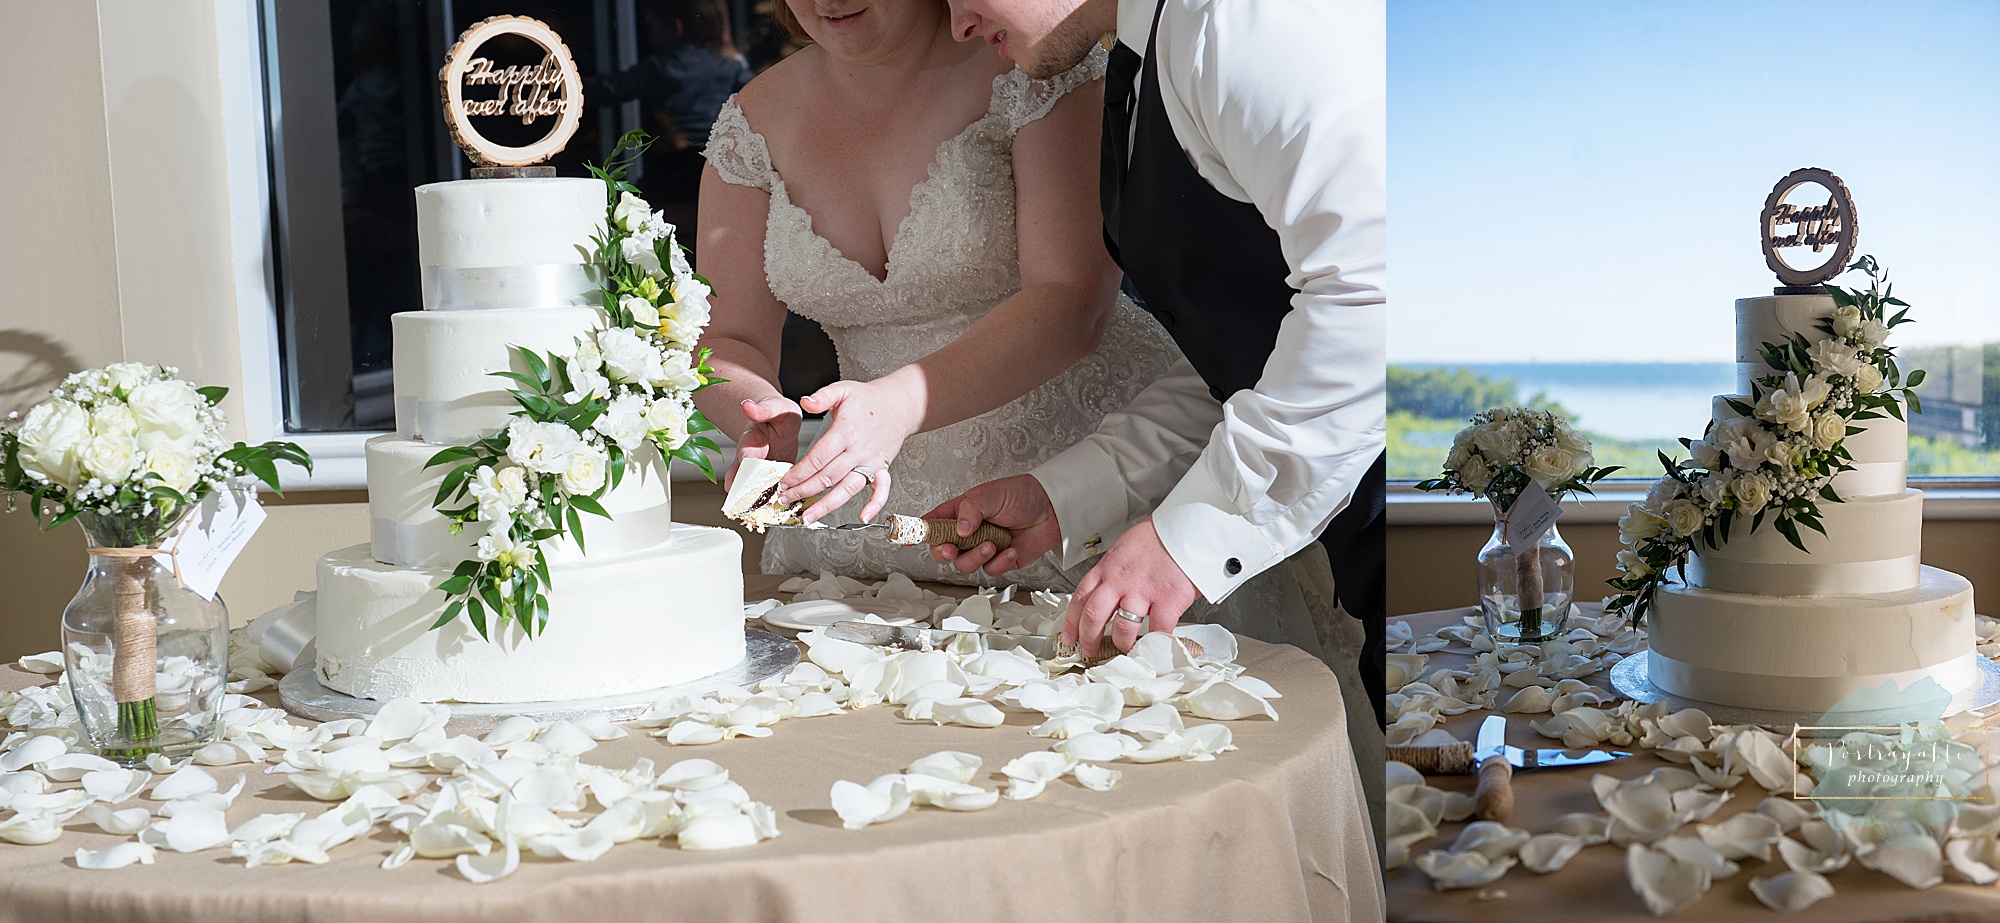 how-to-cut-your-wedding-cake-_1709.jpg